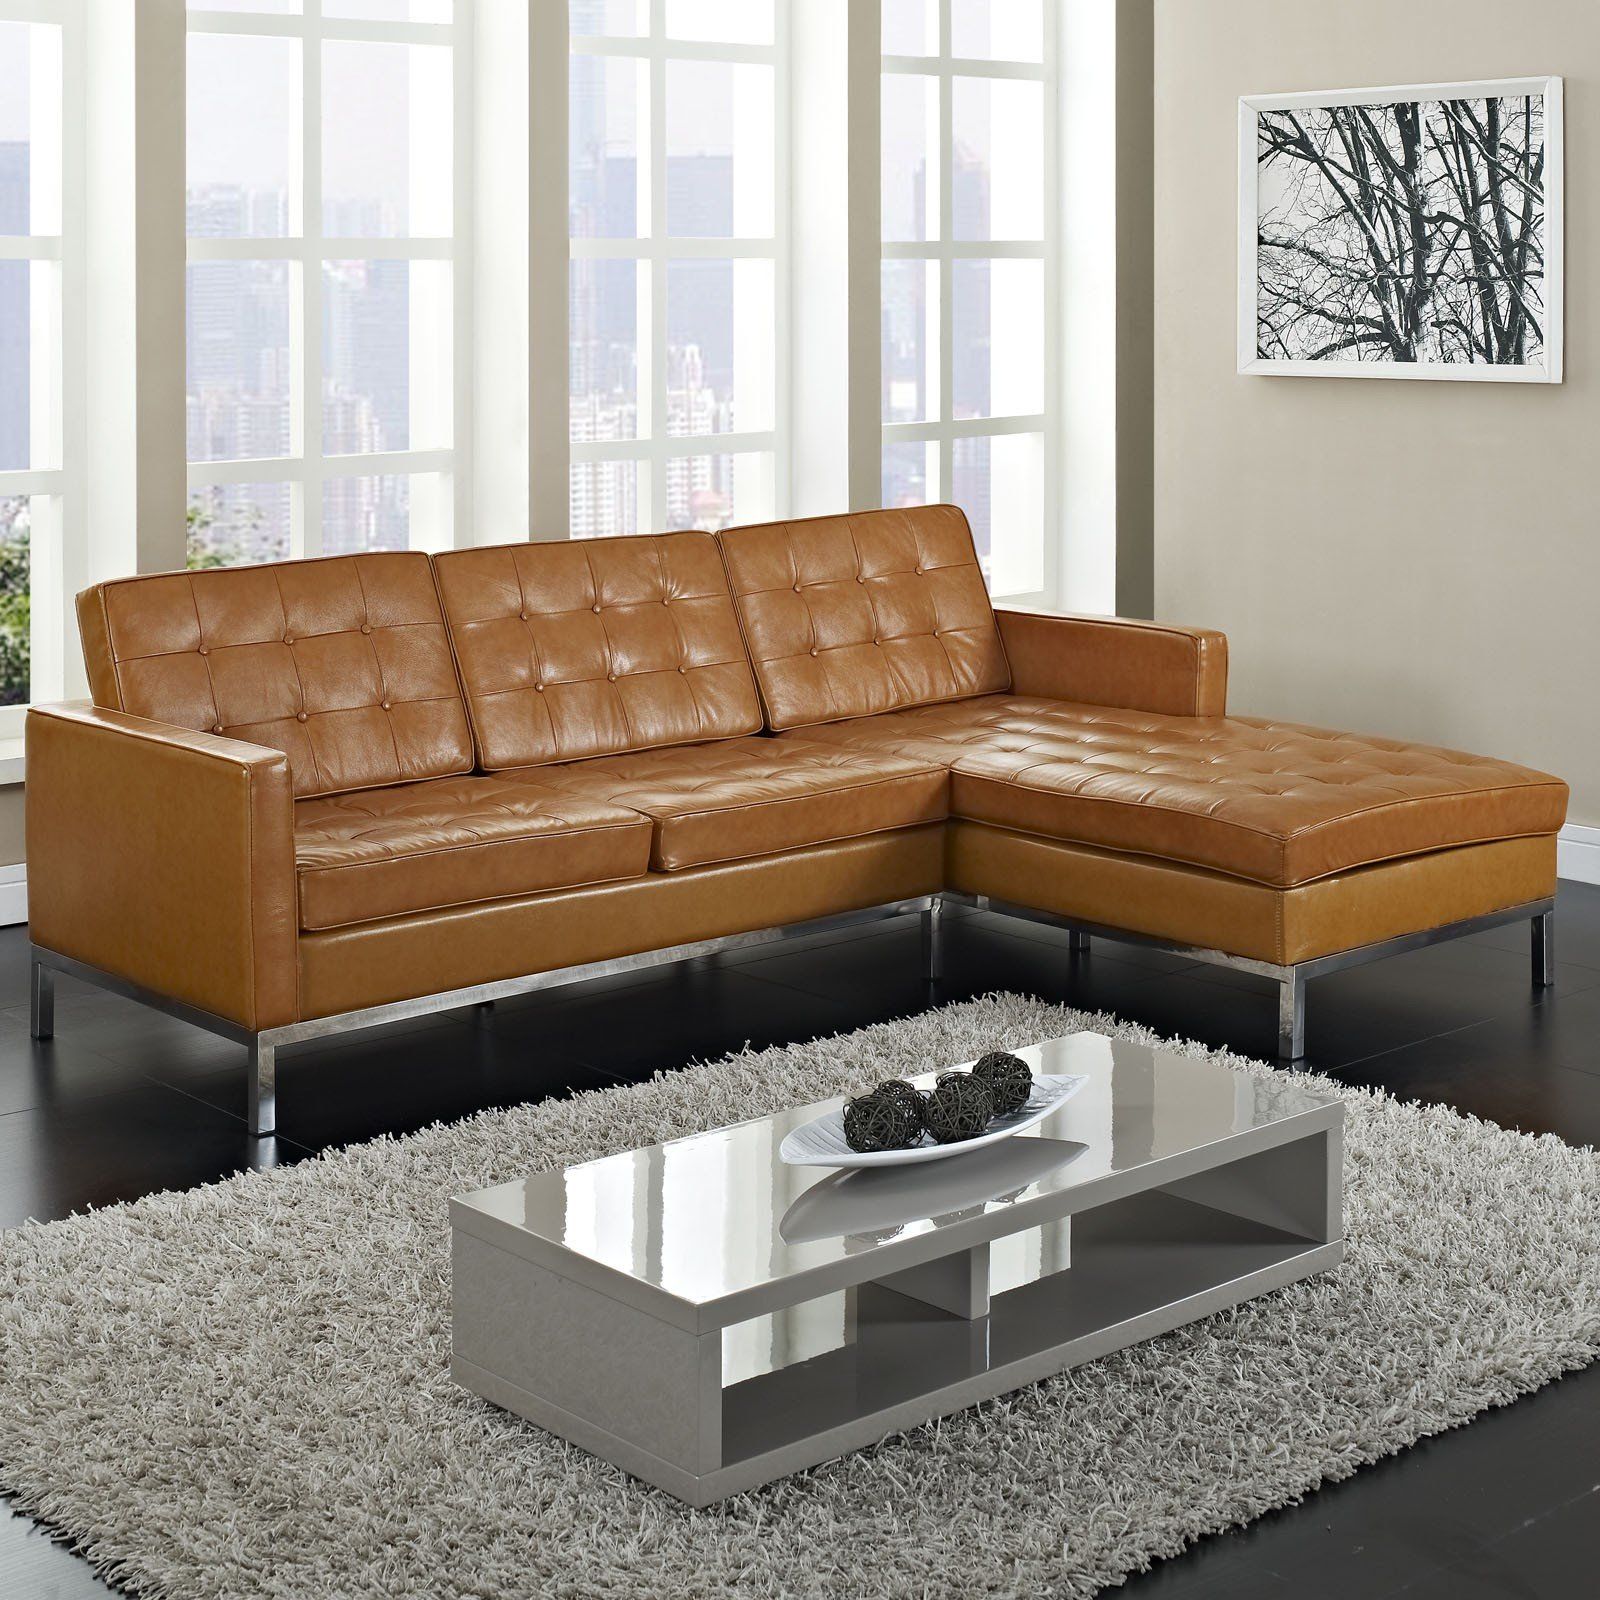 Simple Review About Living Room Furniture: Small Sectional With Regard To Easton Small Space Sectional Futon Sofas (View 12 of 15)